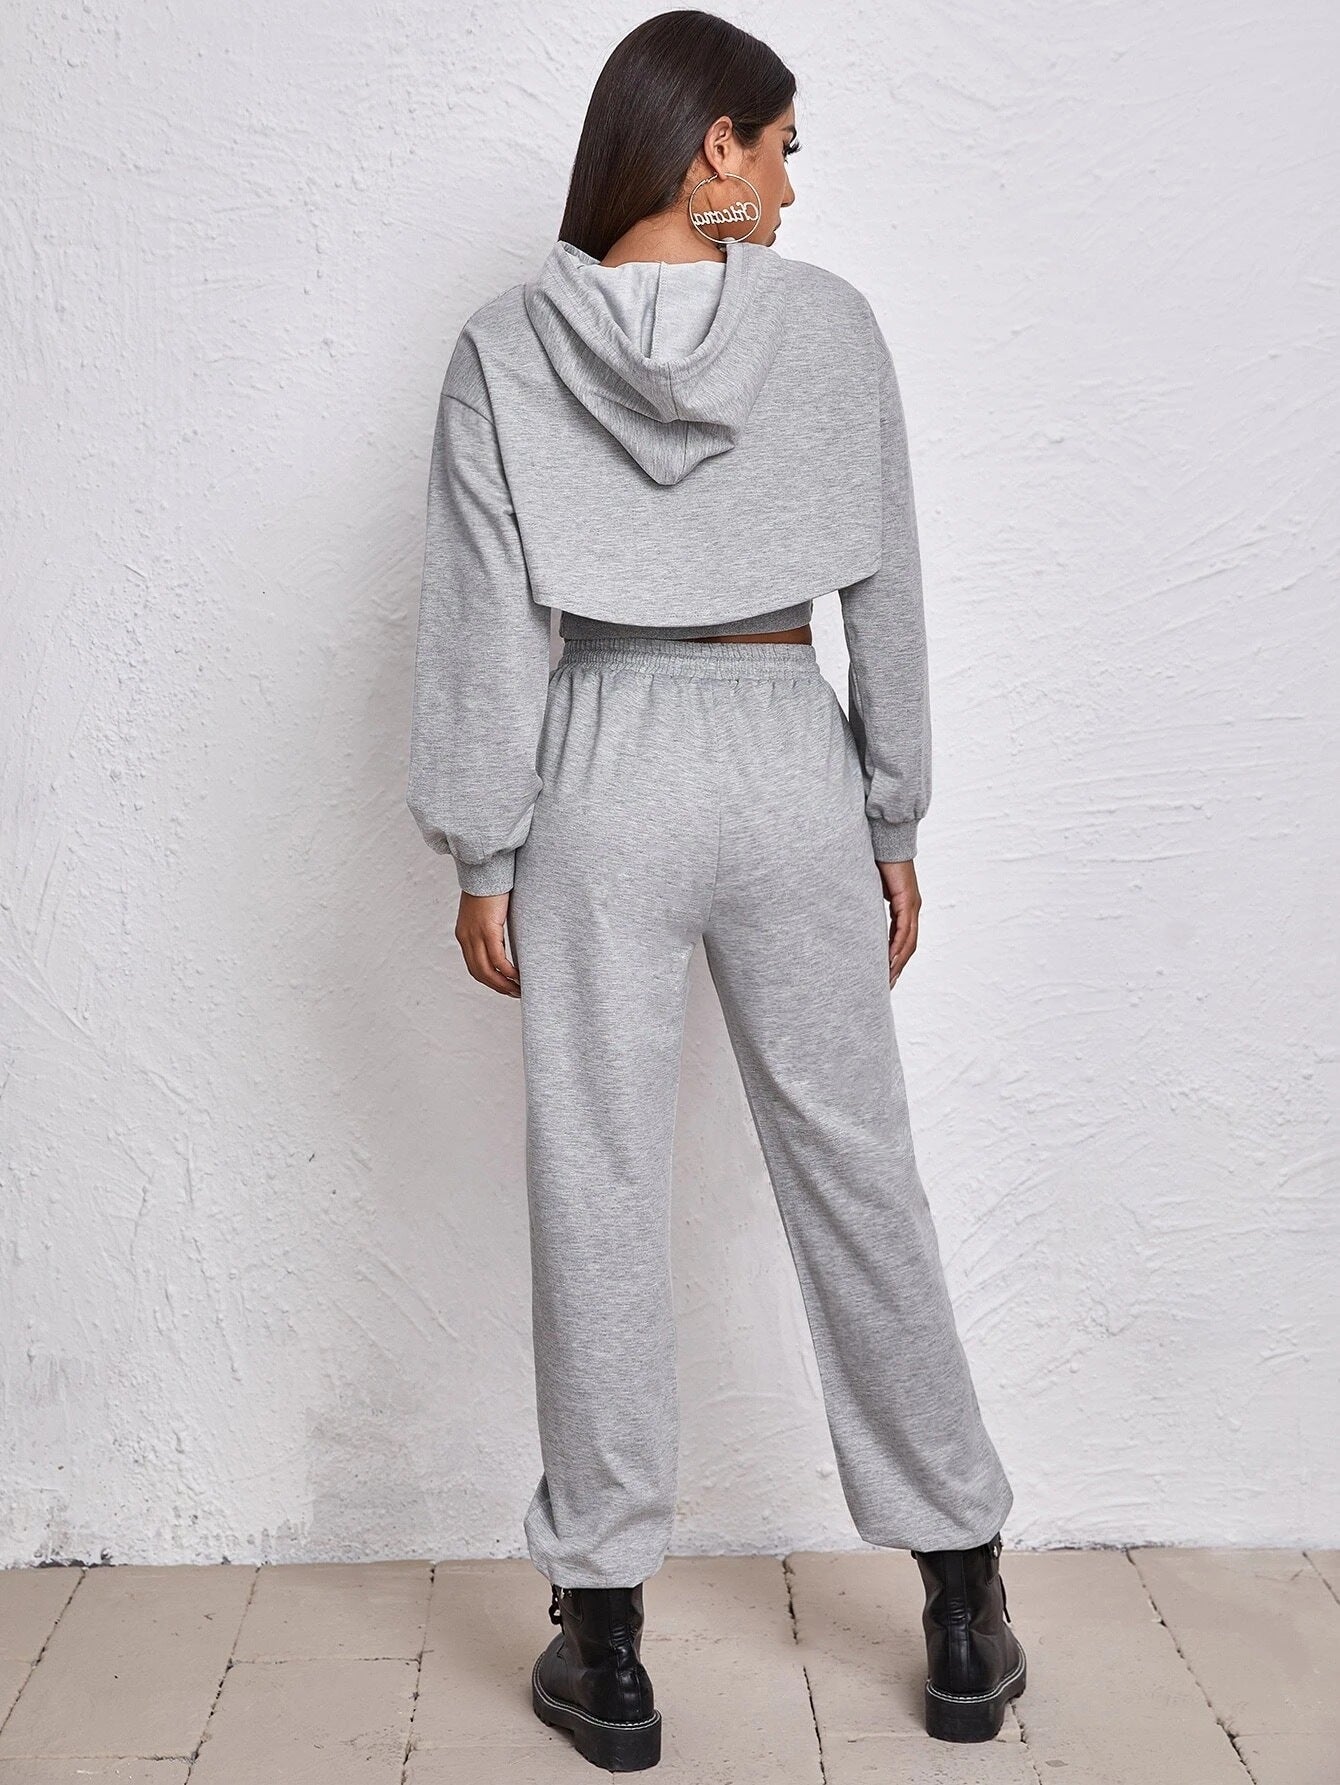 Short Small Sling Vest Sweater Two-piece Suit